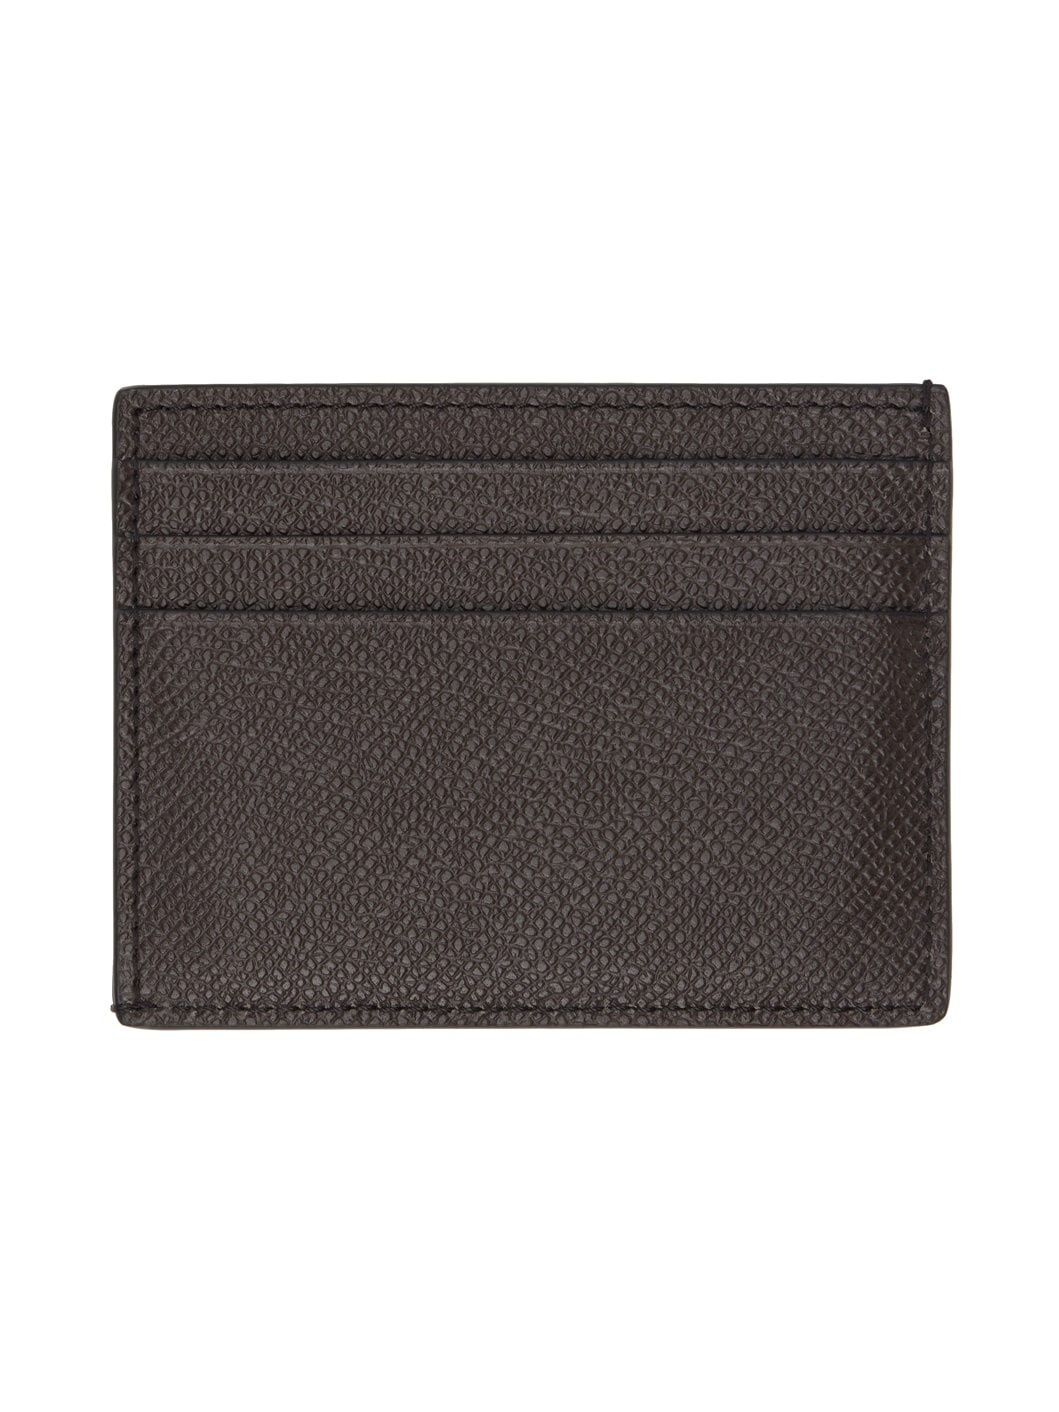 Brown Small Grain Leather Card Holder - 2